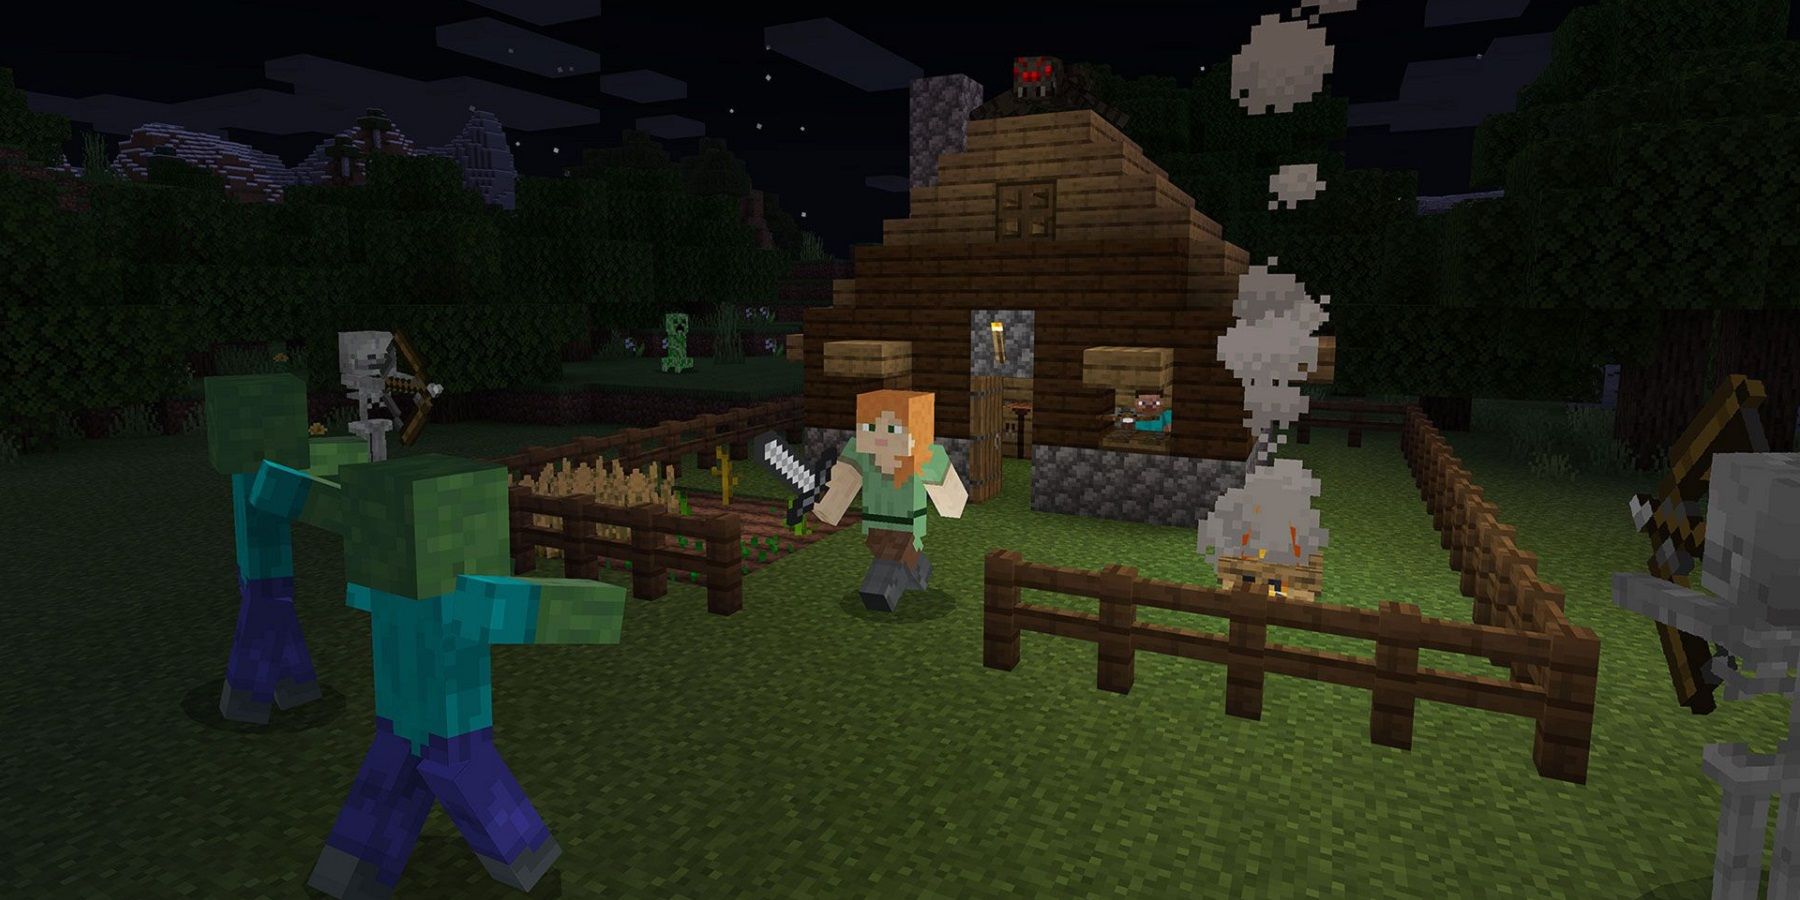 Screenshot from Minecraft showing a nighttime scene in which the player is being set upon by zombies.